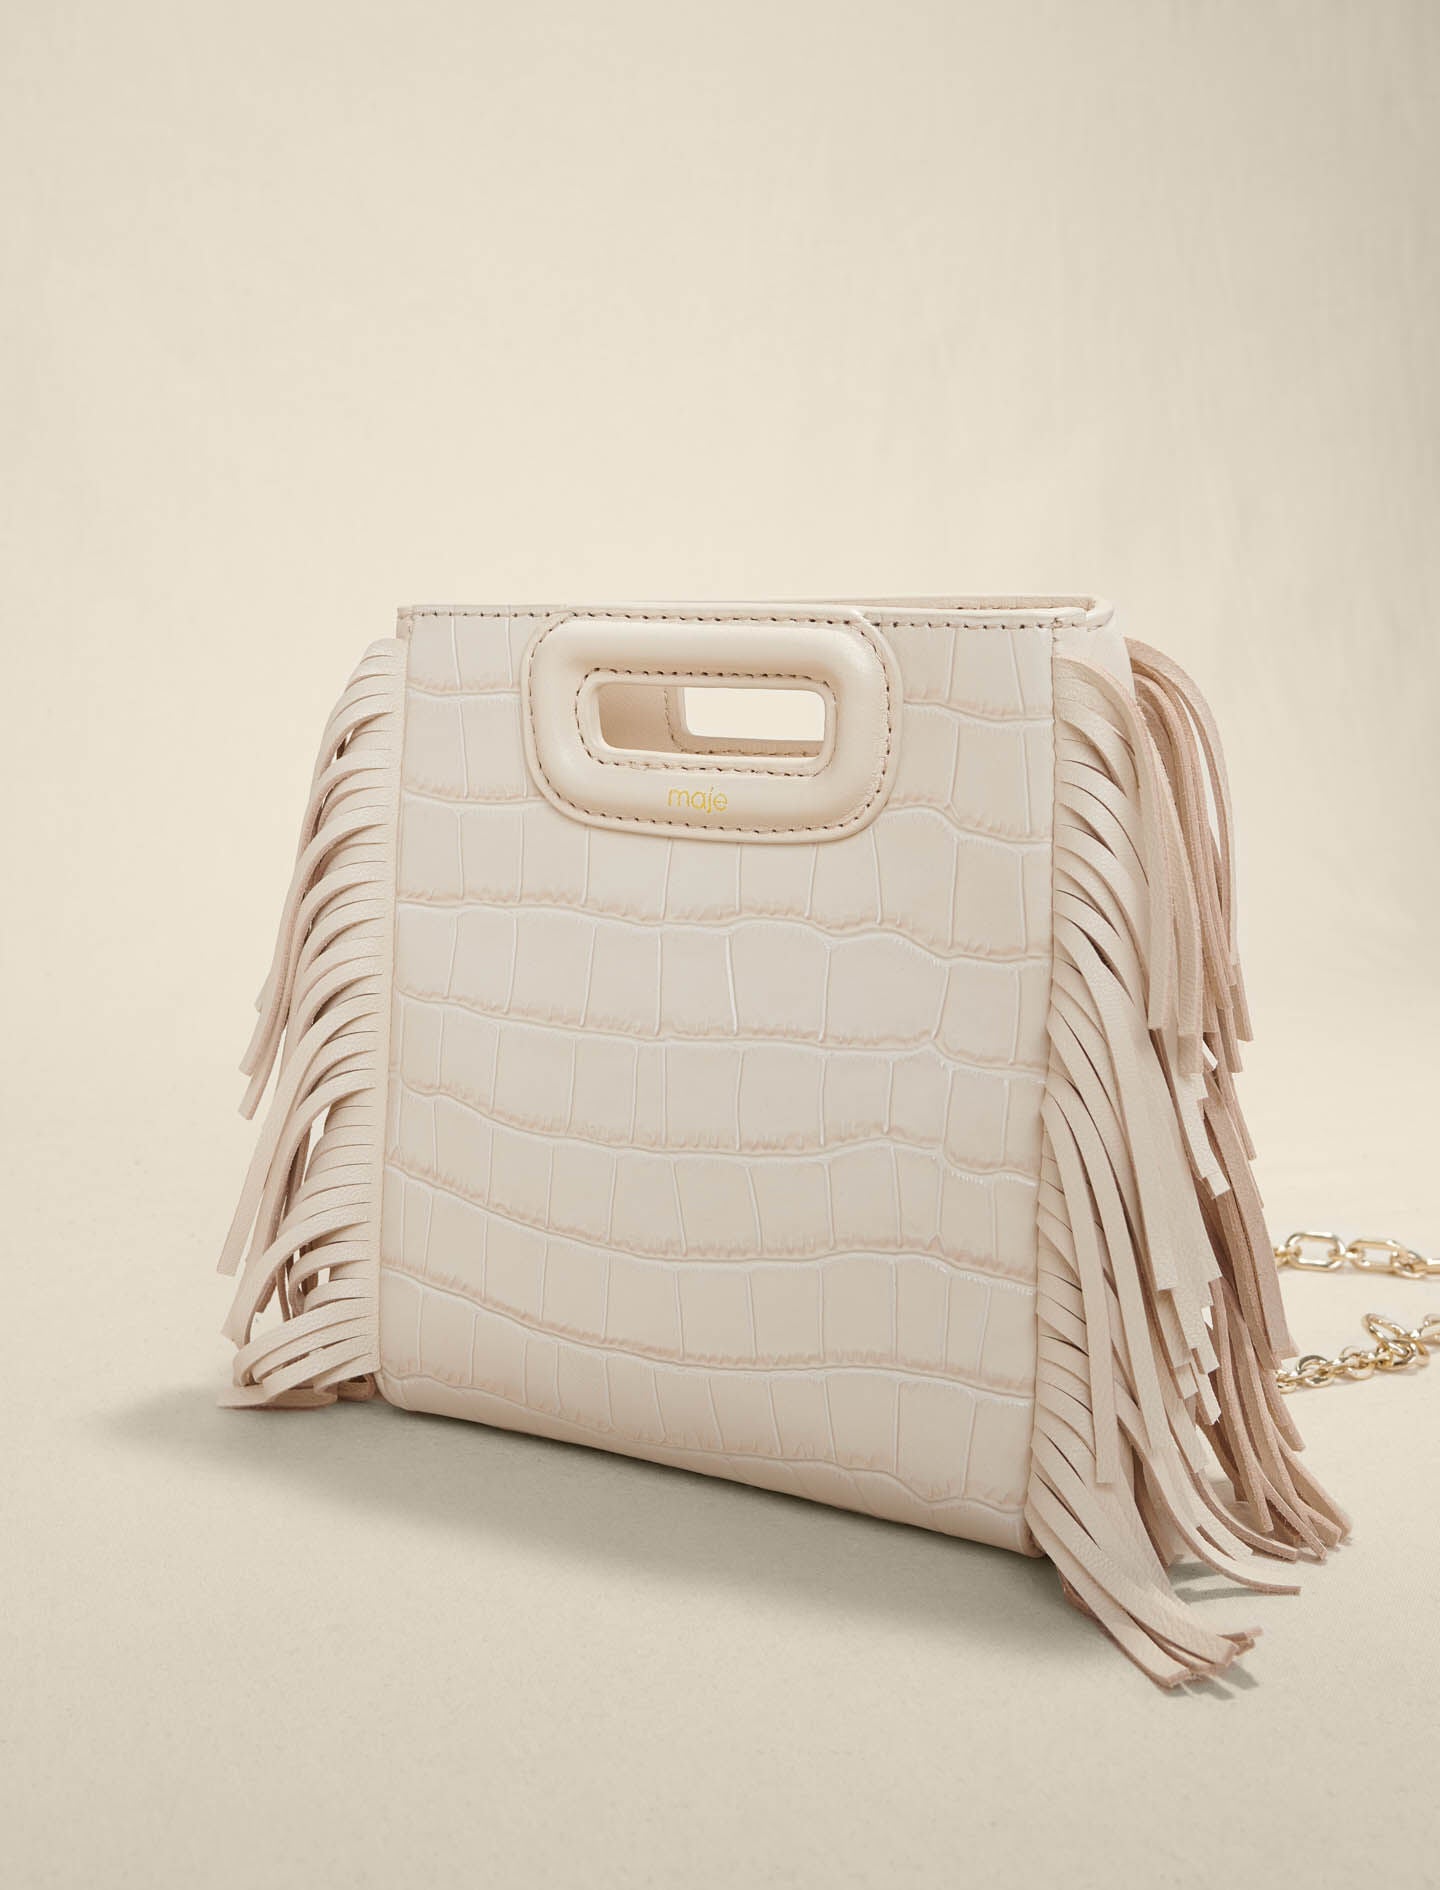 Vanilla-mini embossed-leather m bag with chain